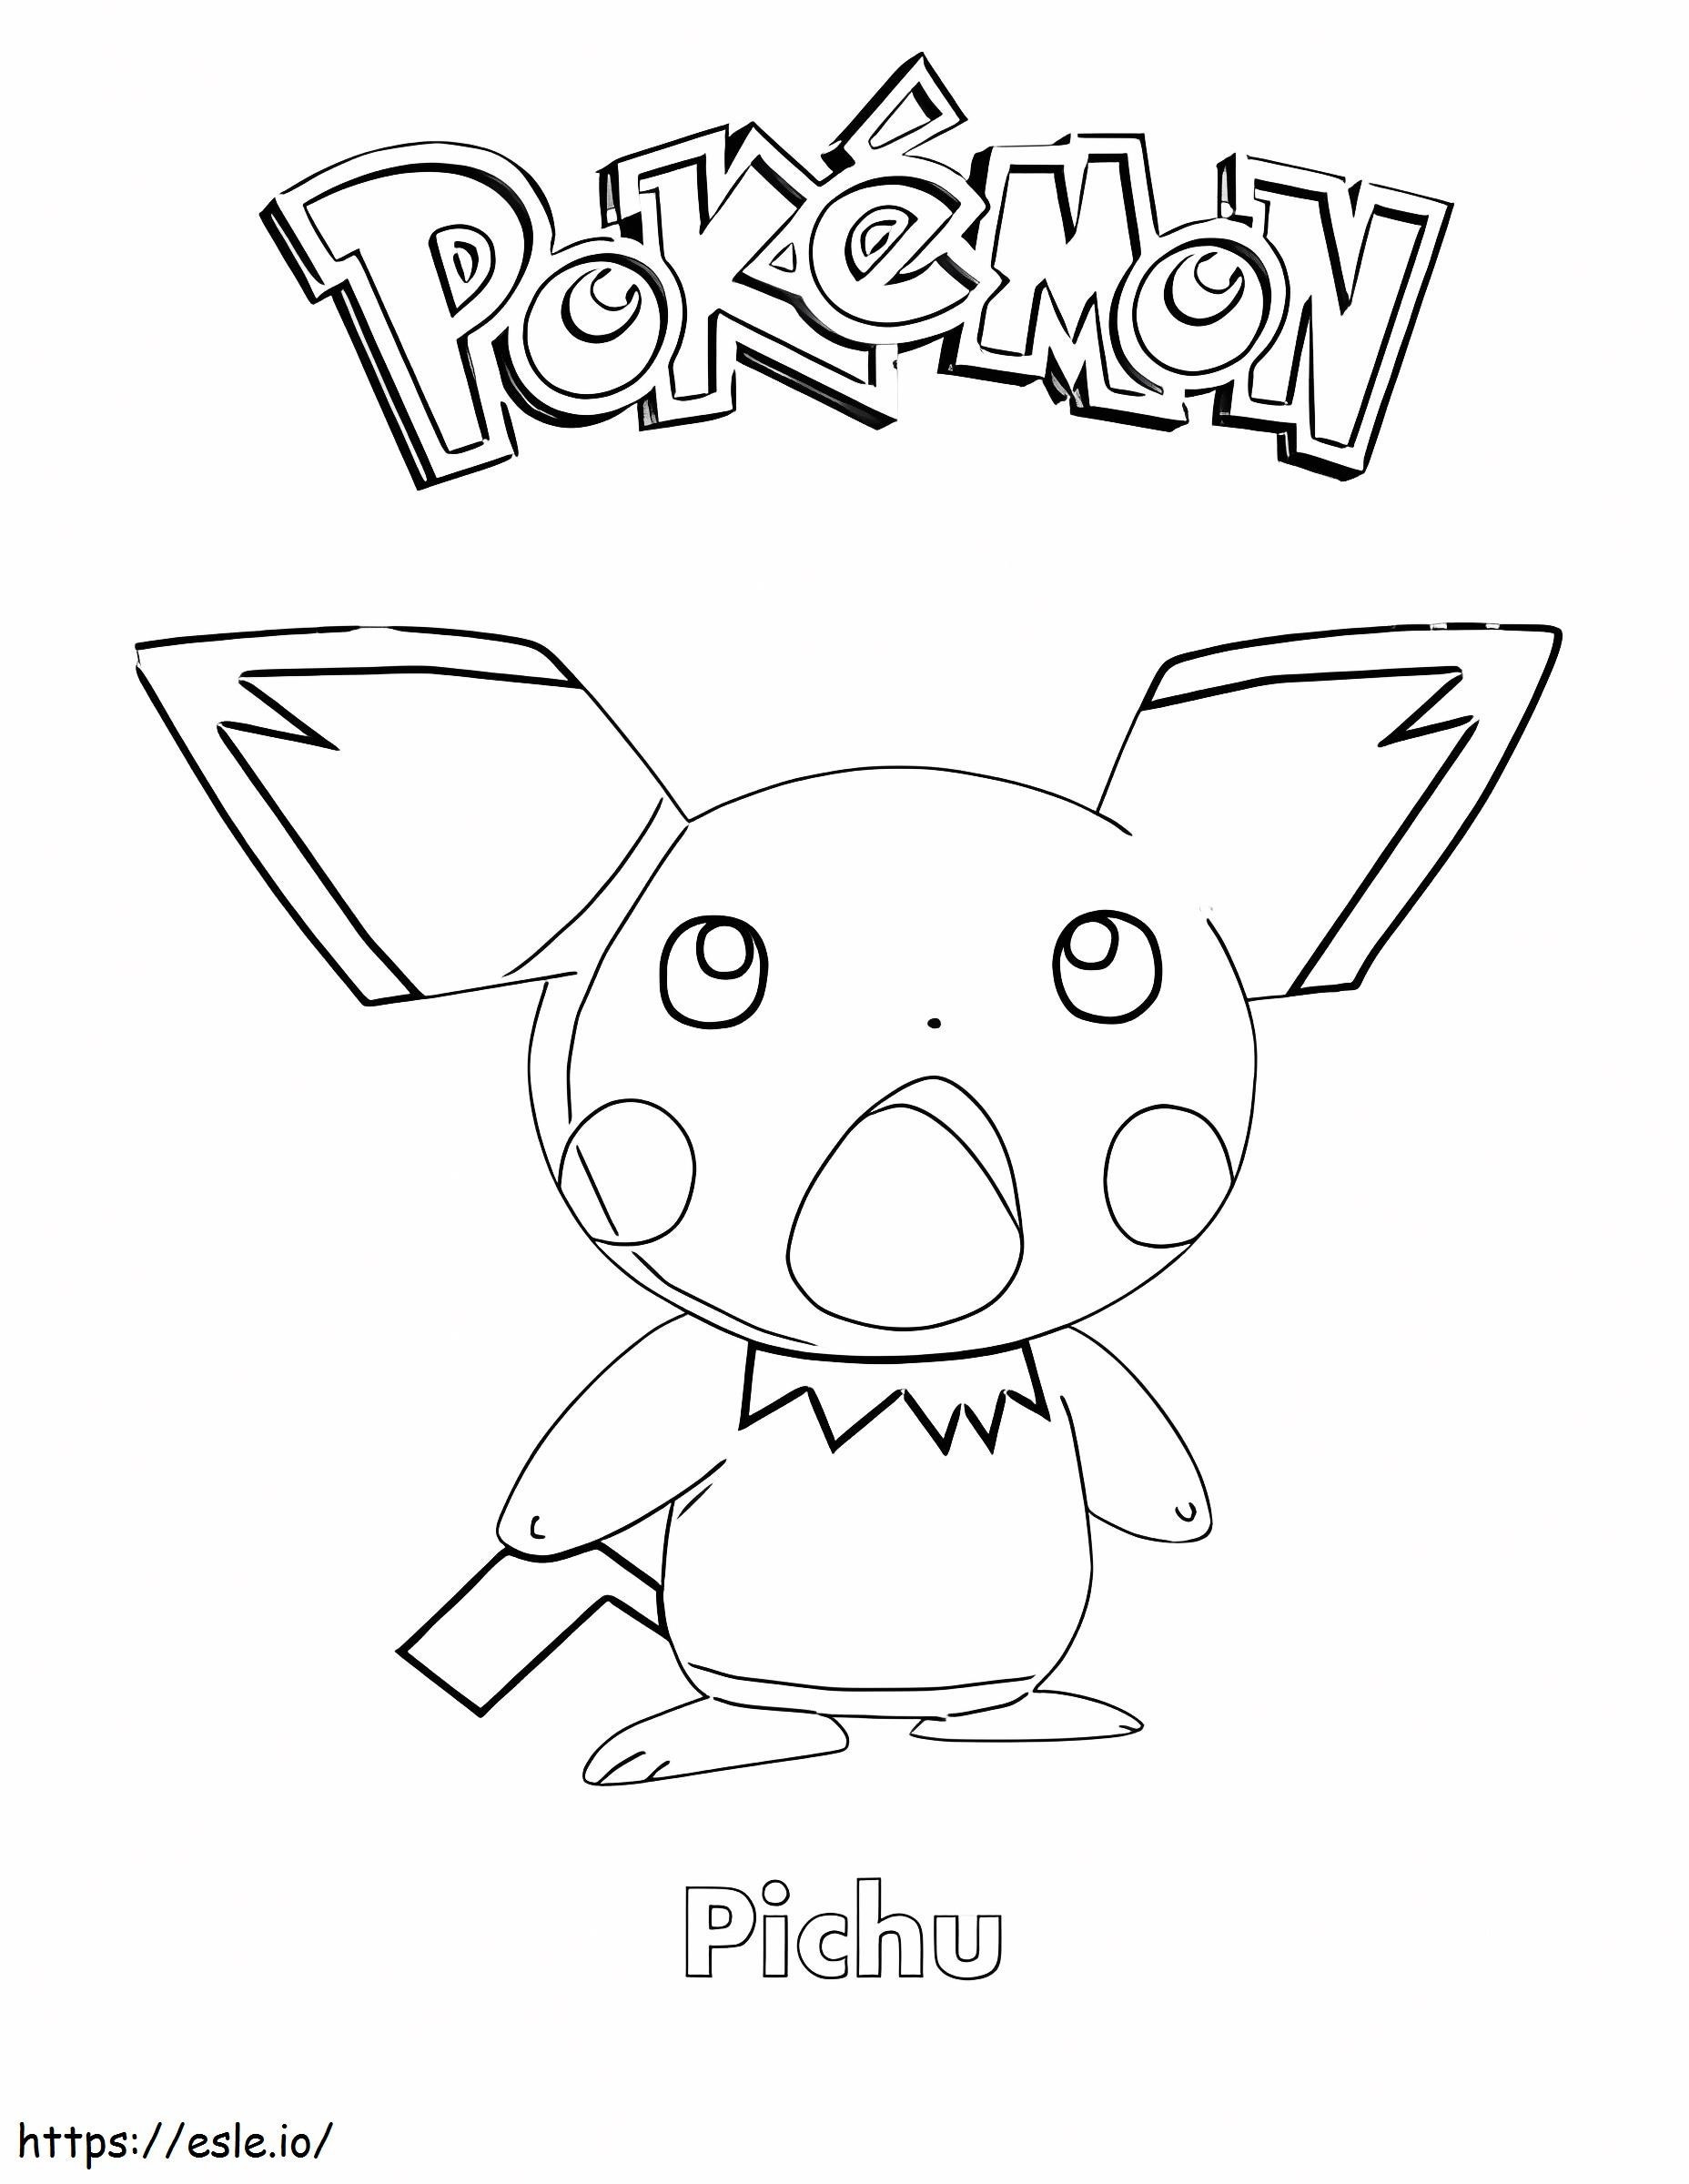 Pichu Normal coloring page